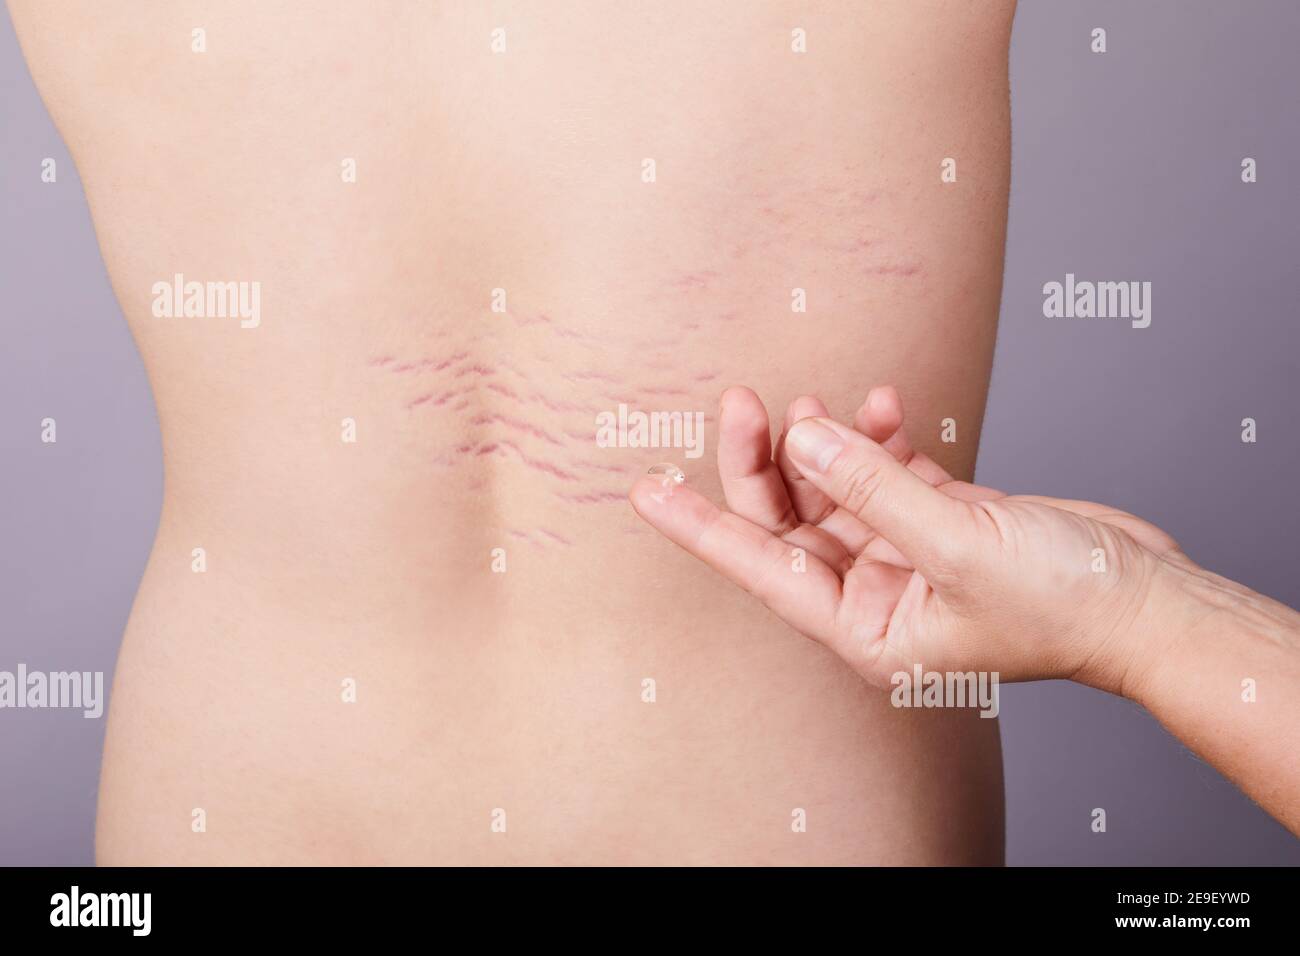 https://c8.alamy.com/comp/2E9EYWD/close-up-view-of-the-back-with-striae-distensae-striae-rubrae-on-the-skin-the-concept-of-impaired-skin-elasticity-during-puberty-2E9EYWD.jpg